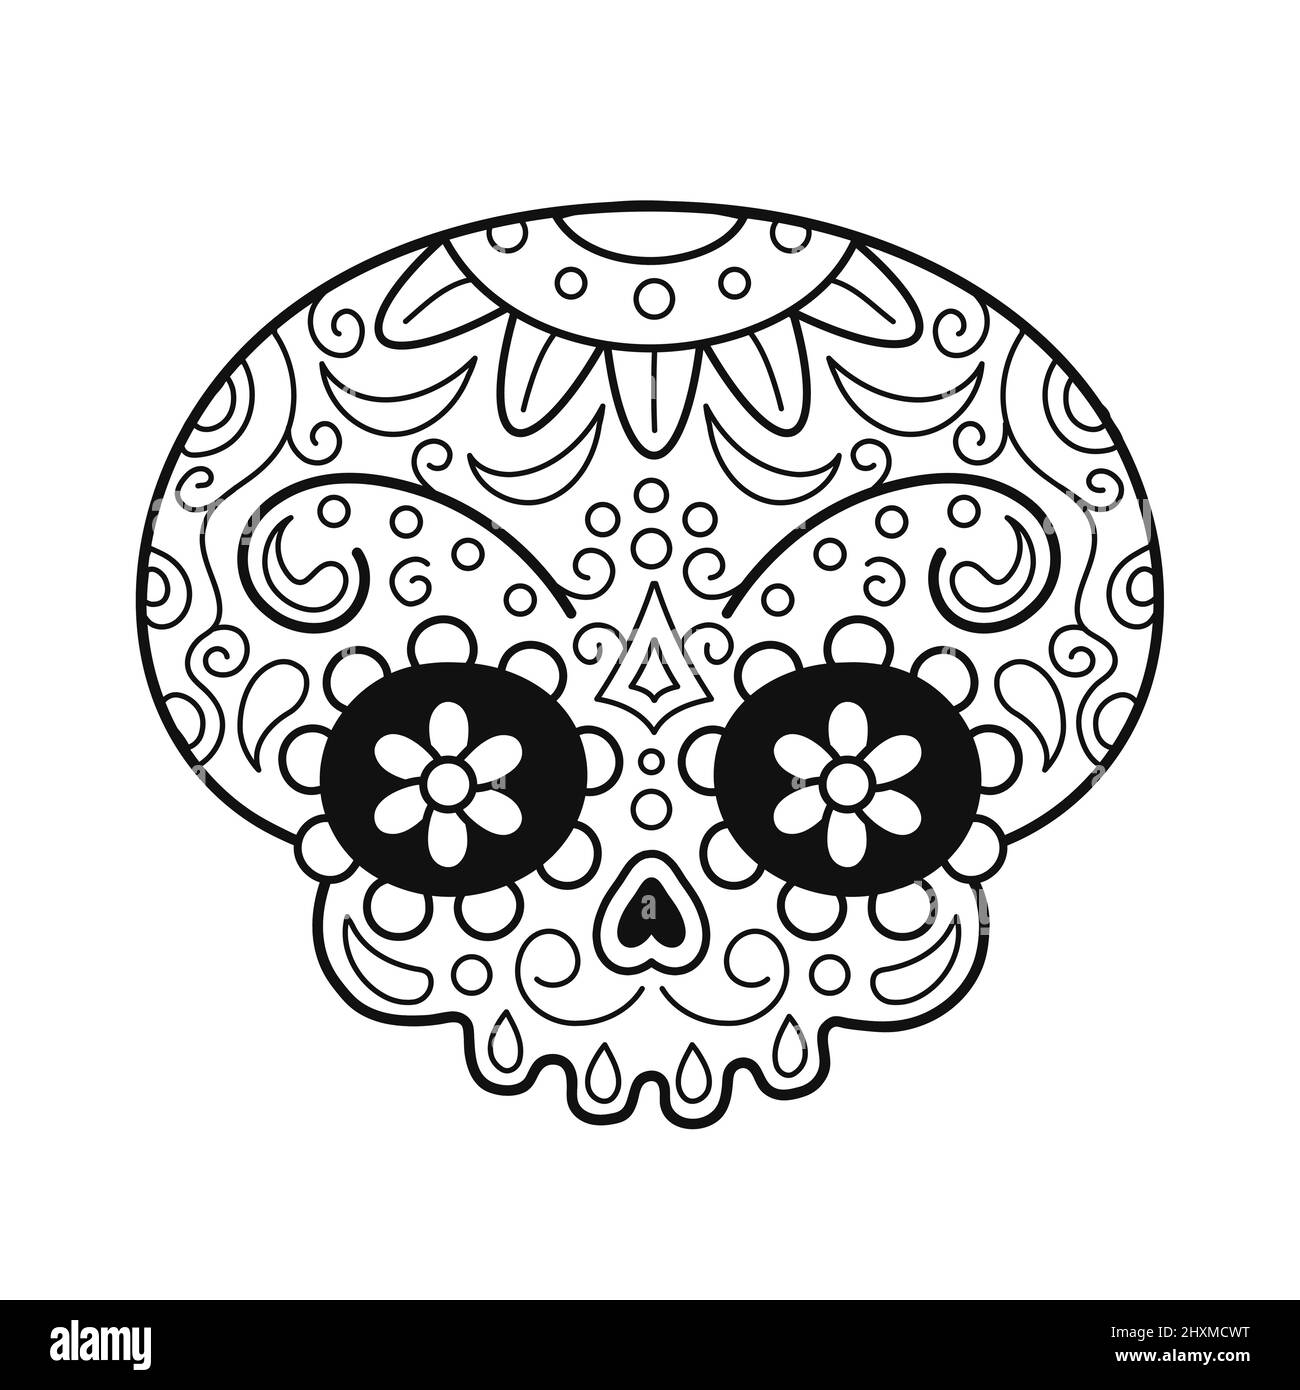 Sugar skull black and white stock photos images